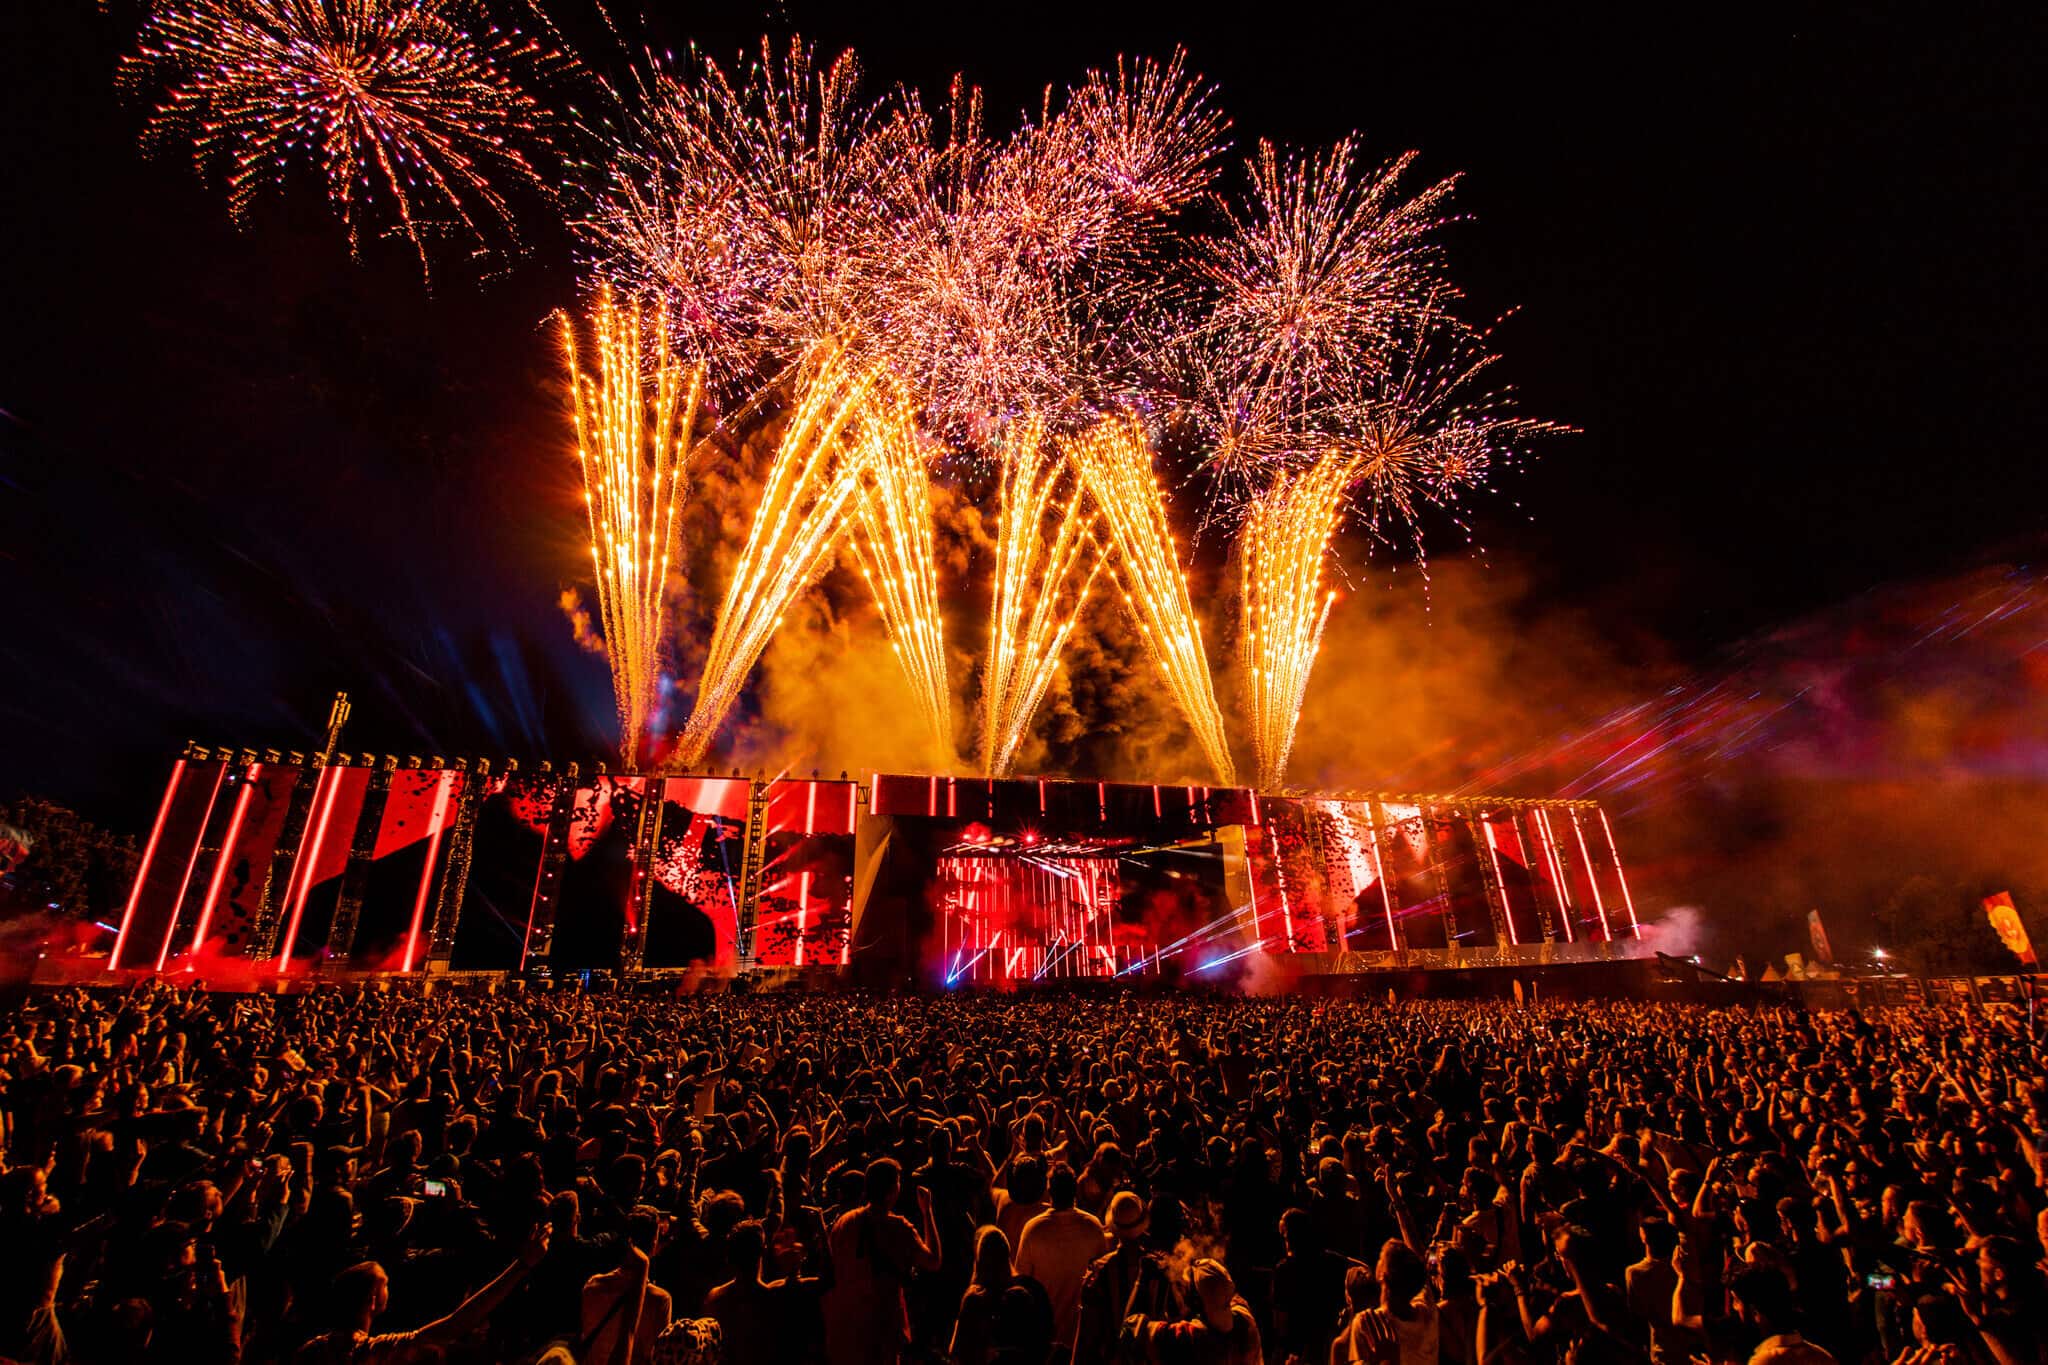 Creamfields North unveils star-studded phase 1 lineup